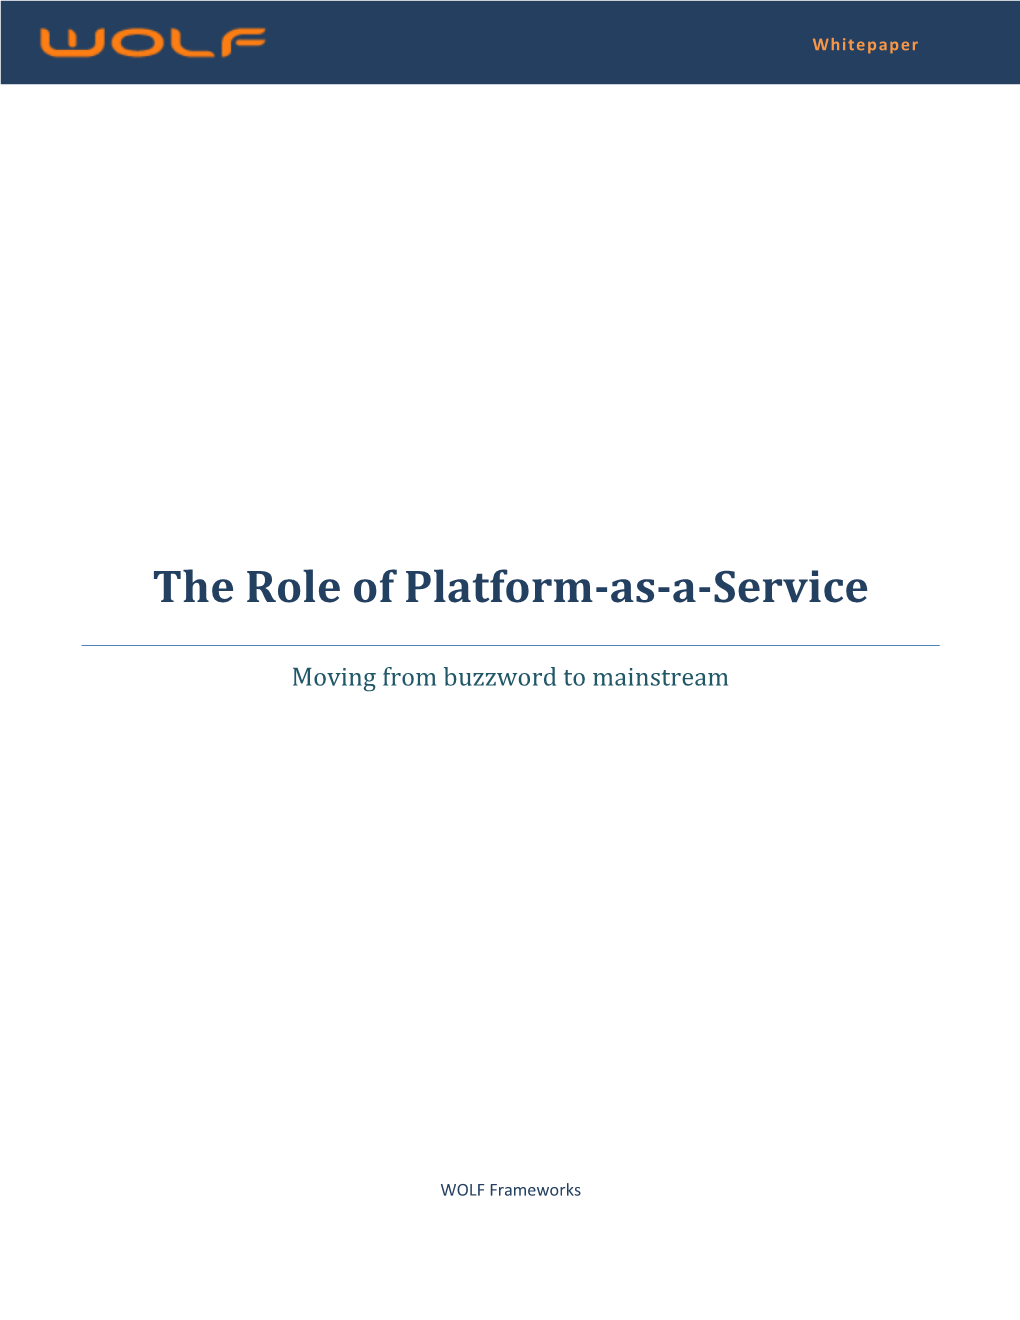 The Role of Platform-As-A-Service